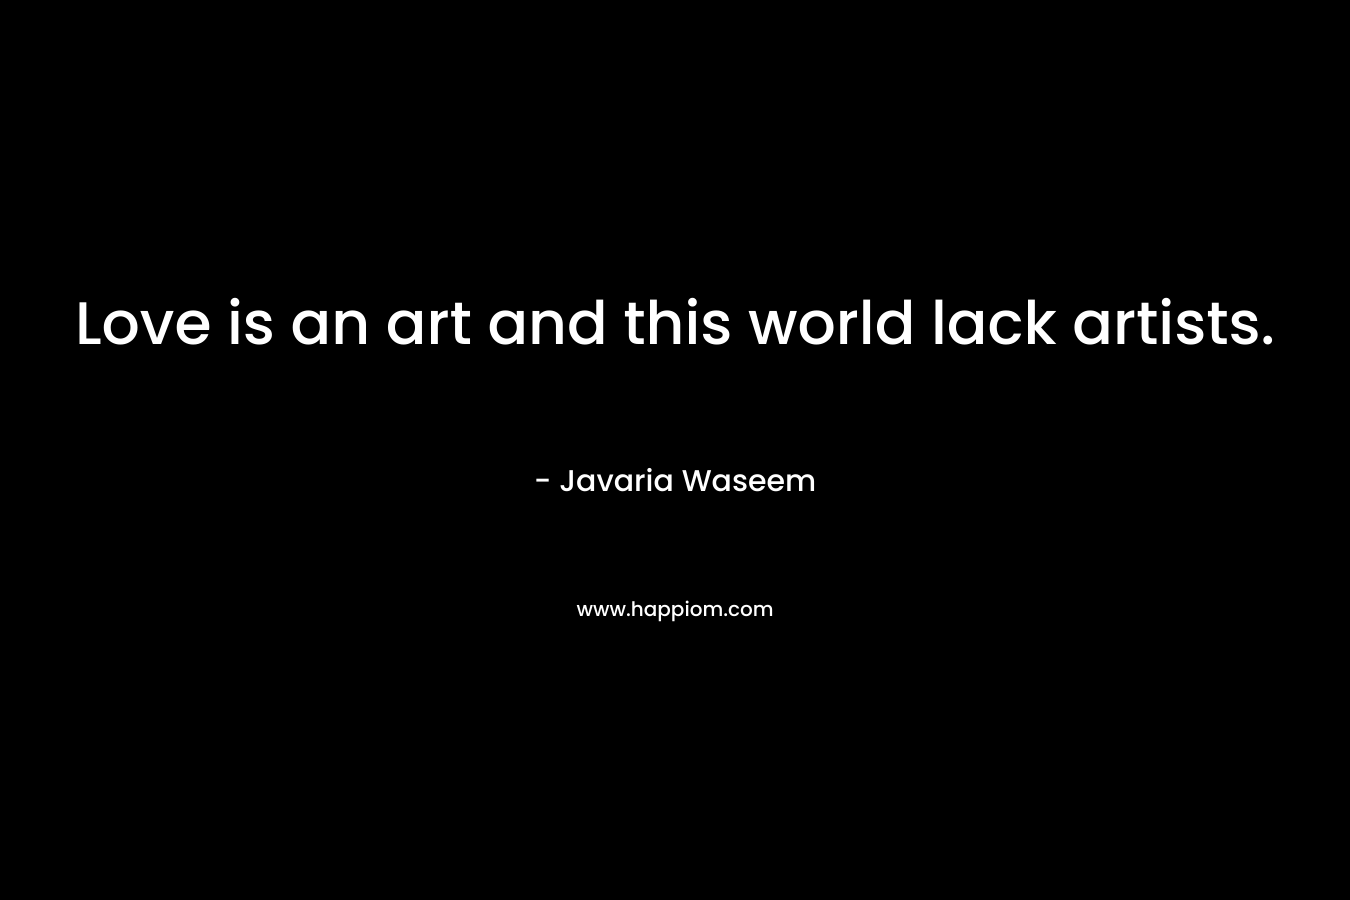 Love is an art and this world lack artists. – Javaria Waseem